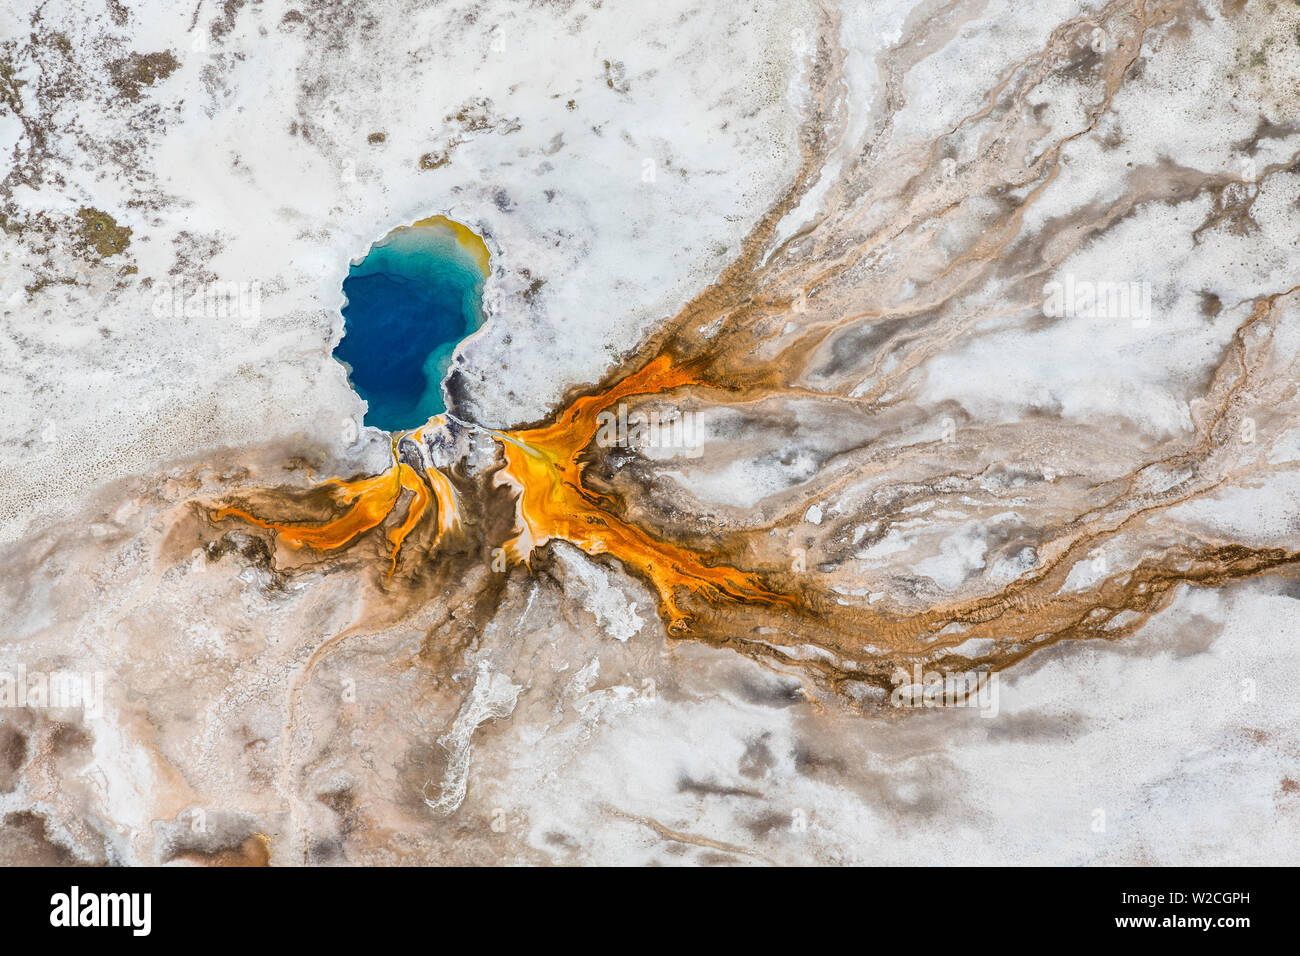 Hot spring from the air, Yellowstone National Park, Wyoming, USA Stock Photo